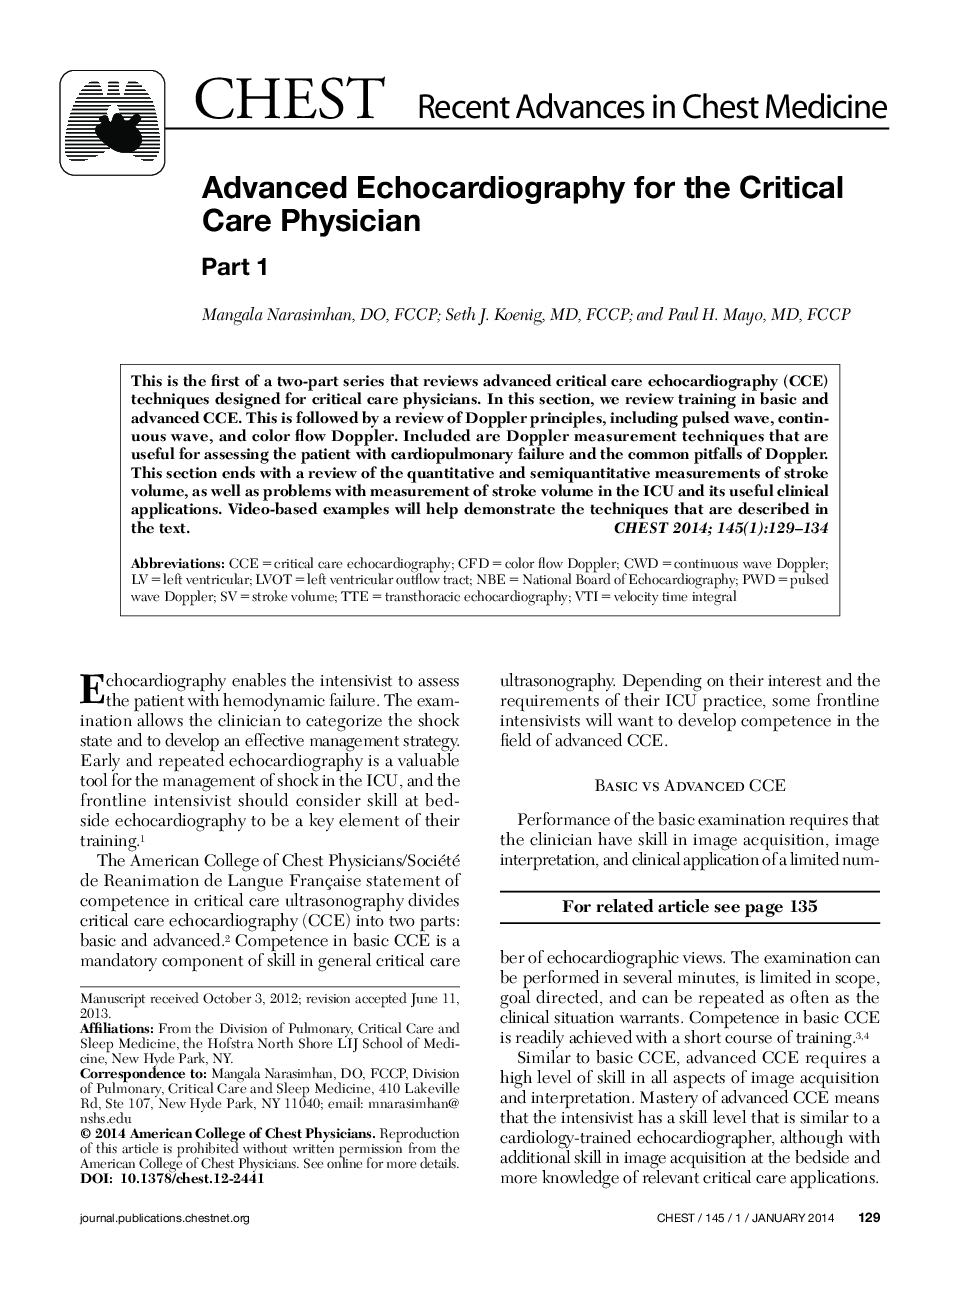 Advanced Echocardiography for the Critical Care Physician: Part 1 